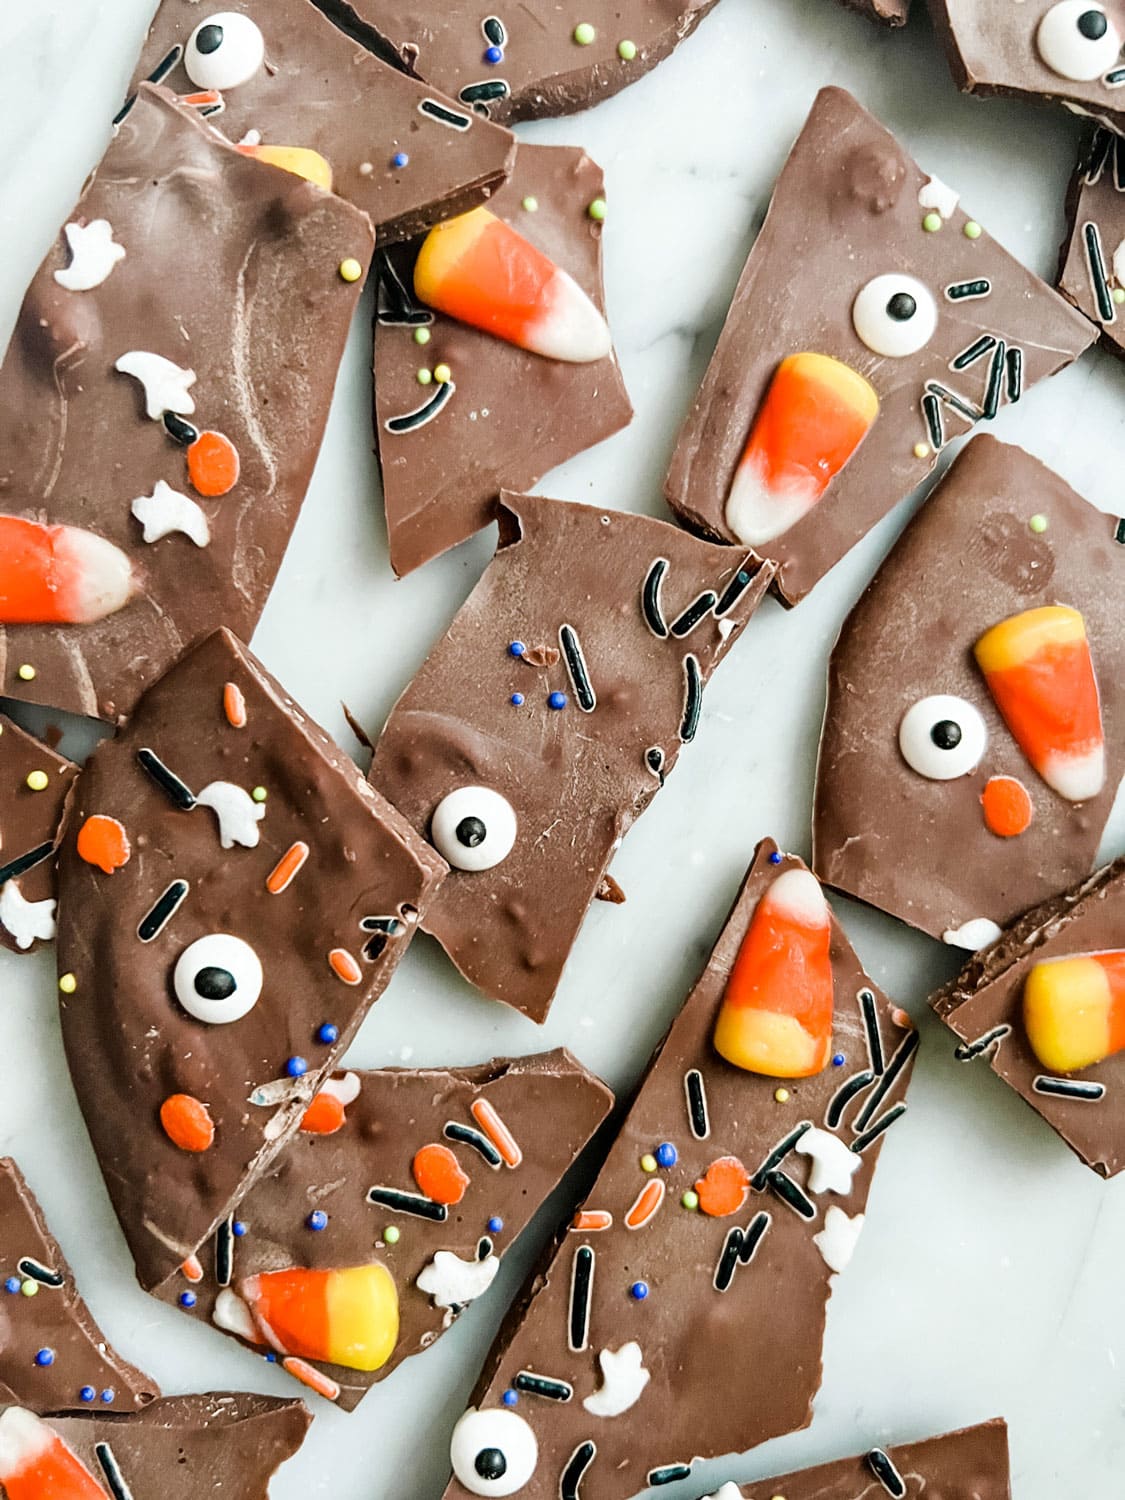 All you need to make halloween bark is some chocolate and some toppings